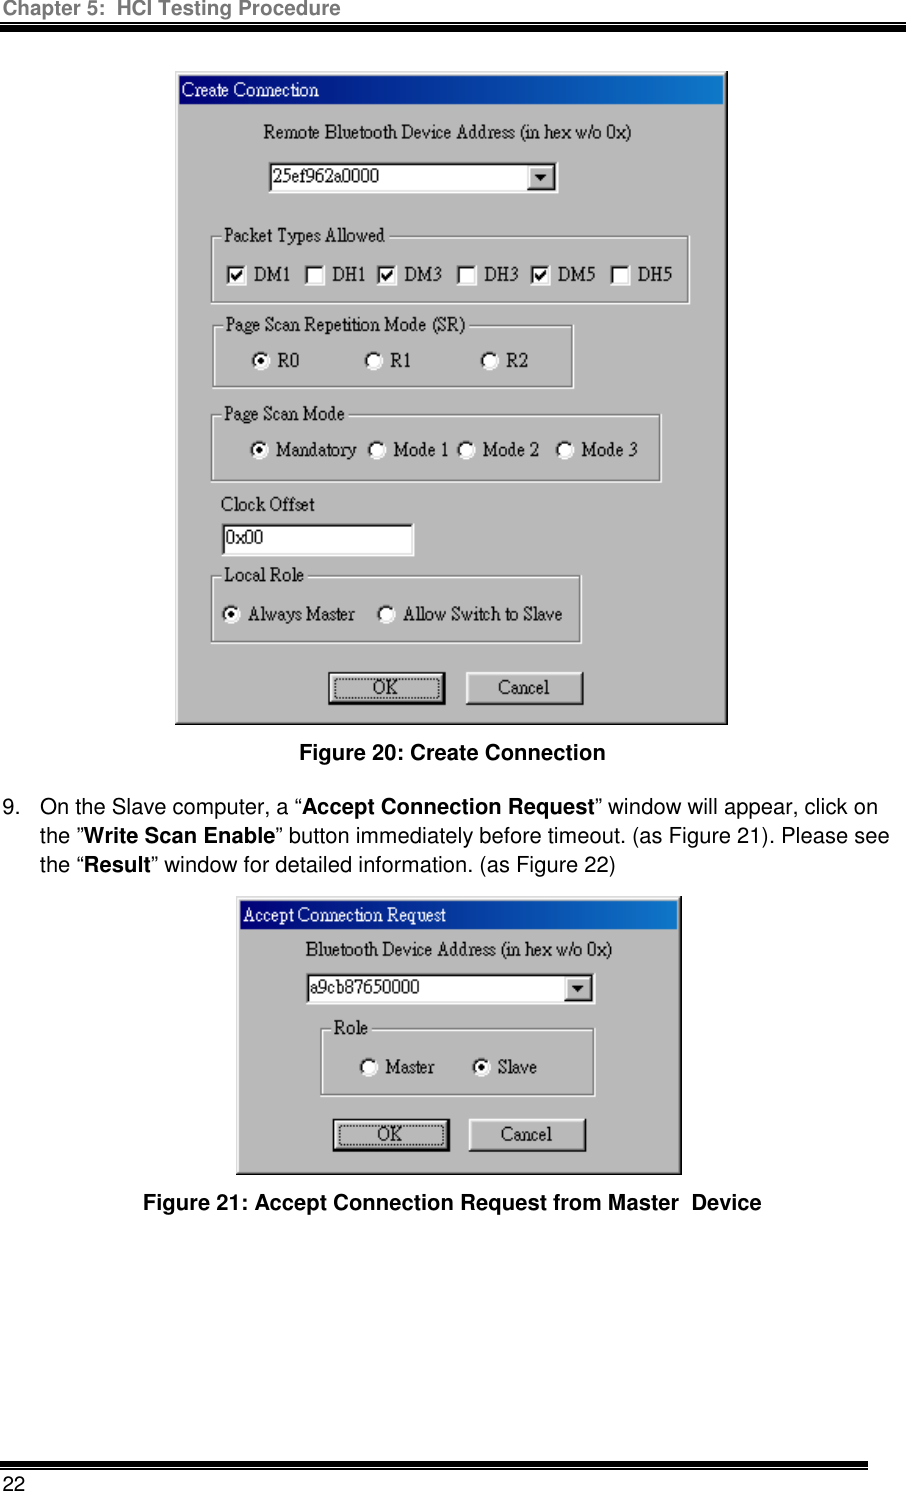 Chapter 5:  HCI Testing Procedure  22  Figure 20: Create Connection  9.  On the Slave computer, a “Accept Connection Request” window will appear, click on the ”Write Scan Enable” button immediately before timeout. (as Figure 21). Please see the “Result” window for detailed information. (as Figure 22) Figure 21: Accept Connection Request from Master  Device 